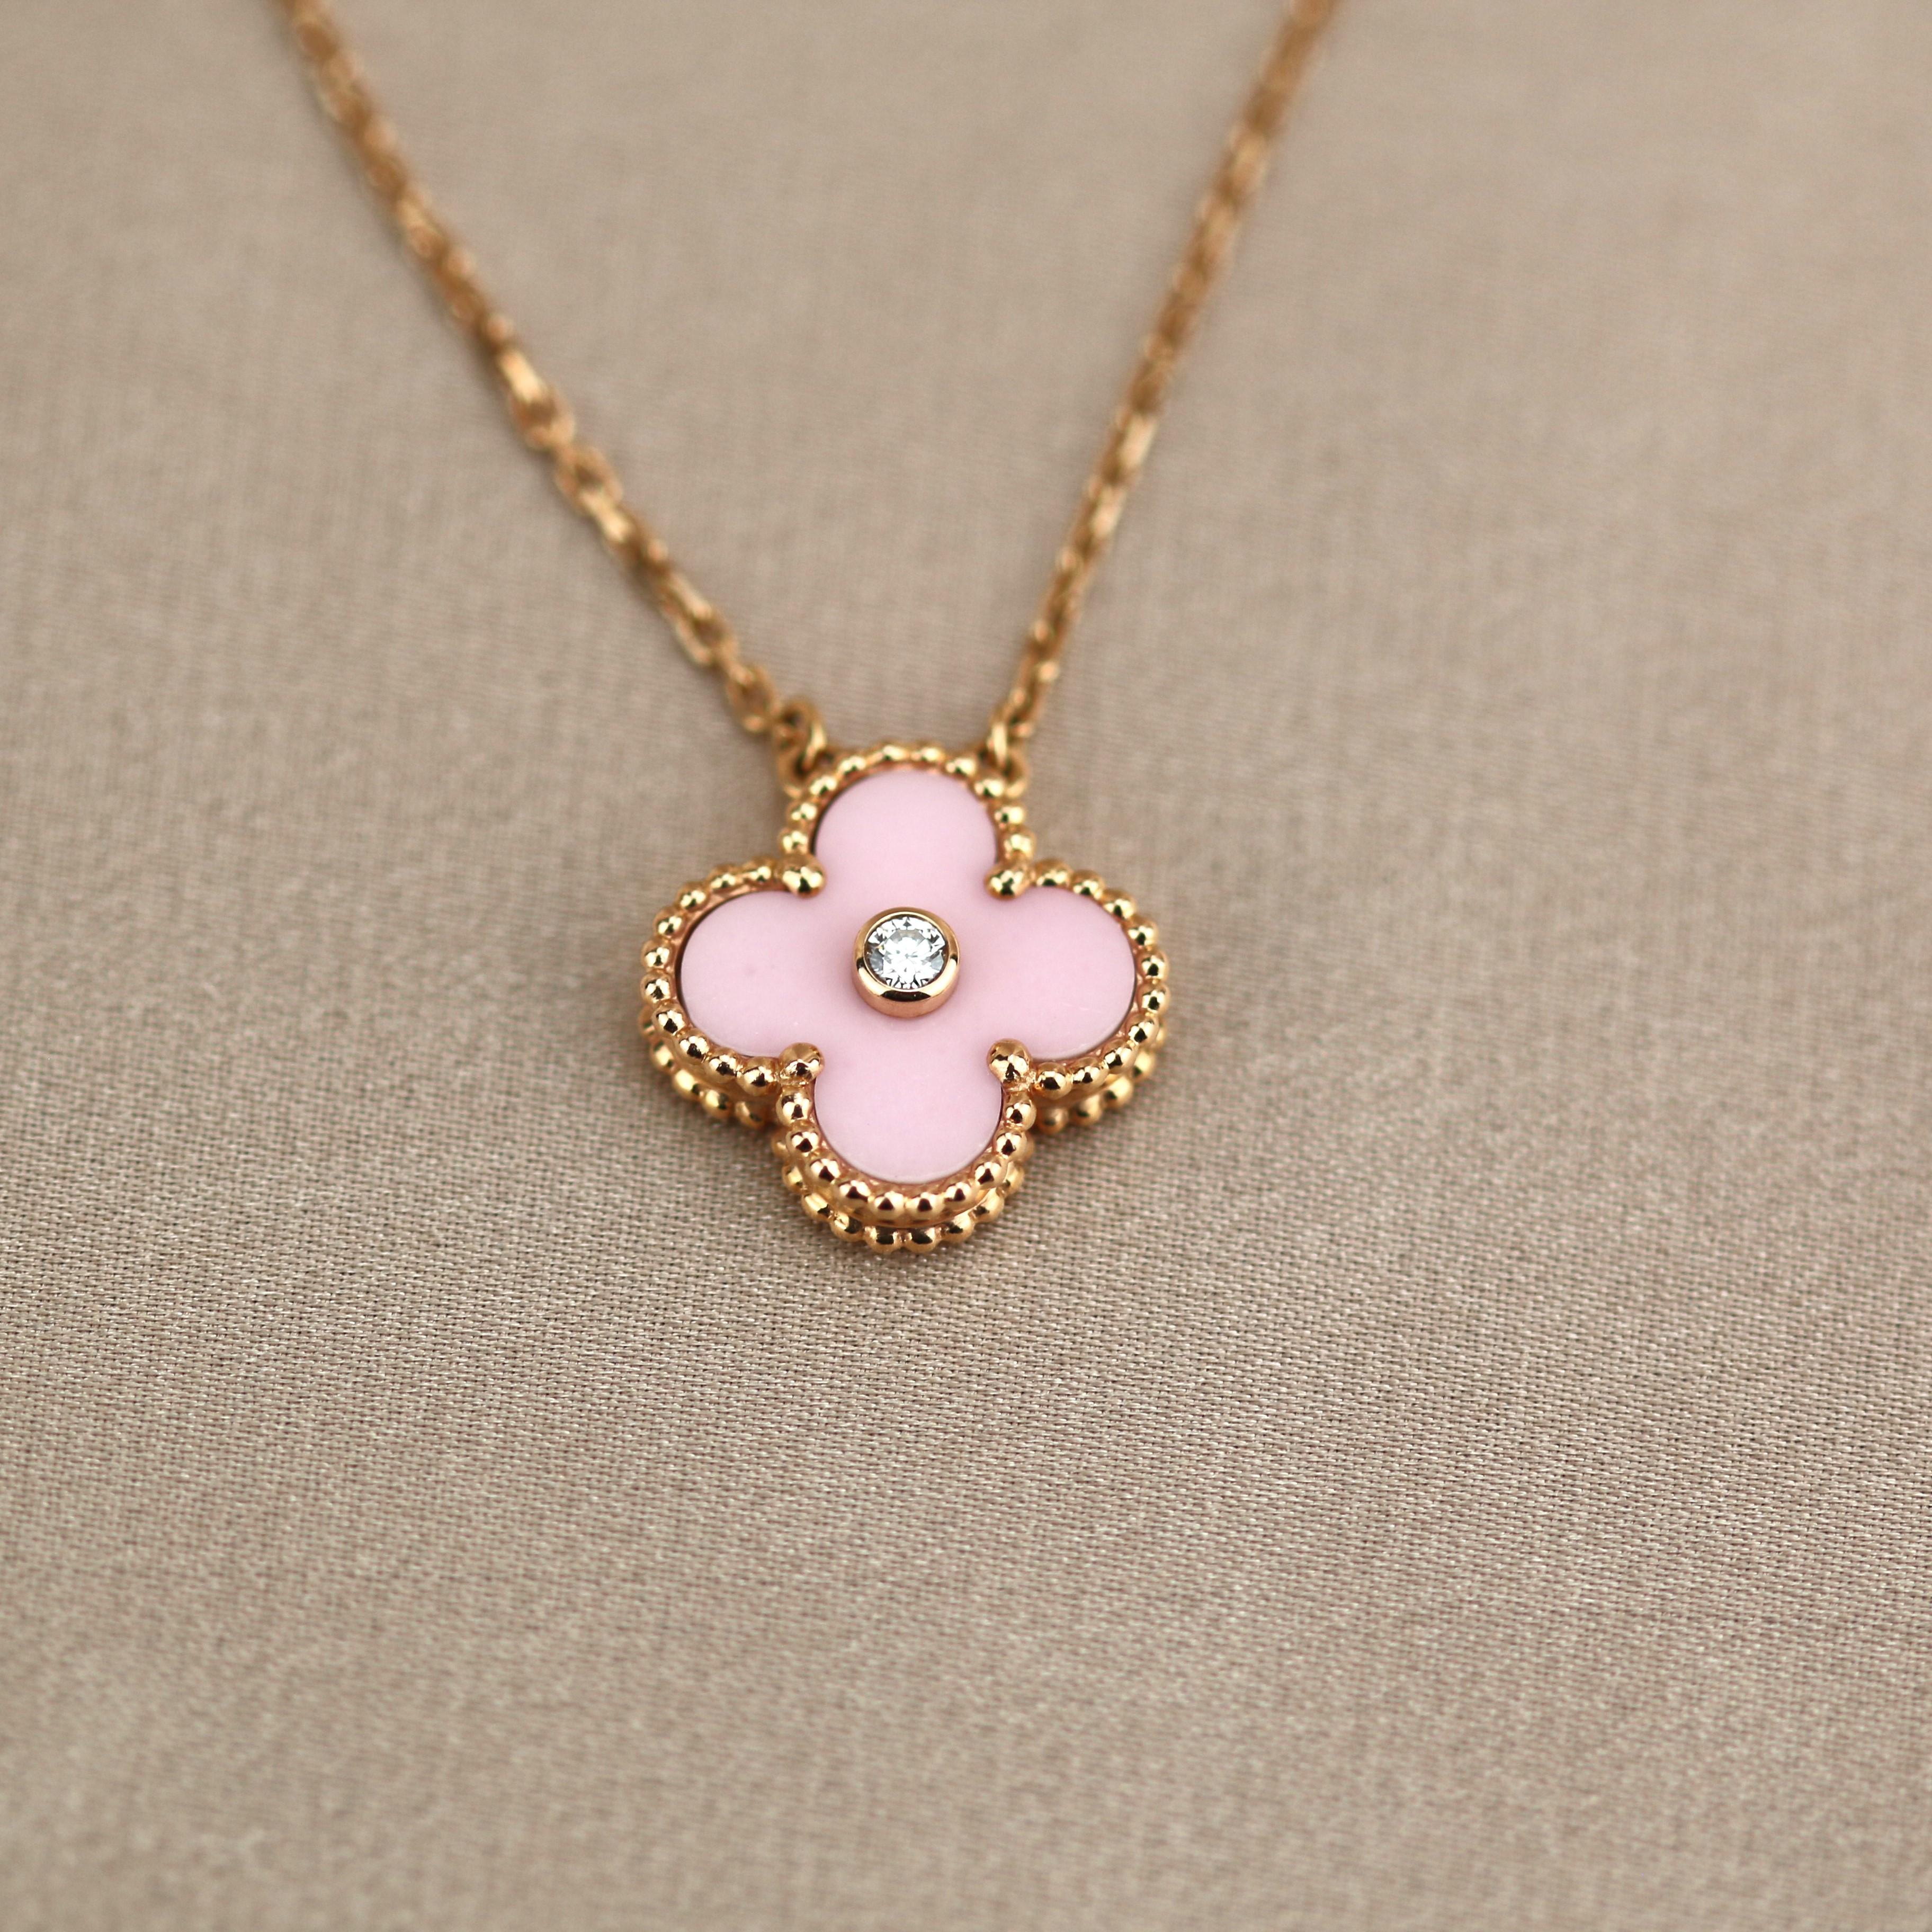 18k Rose Gold Limited Edition Alhambra Diamond And Pink Porcelain Necklace was released in 2015 Christmas as the holiday pendant. VCA doesn't create this version anymore, truly collective piece!

Dandelion Antiques Code:  AT-1193
Brand:  Van Cleef &